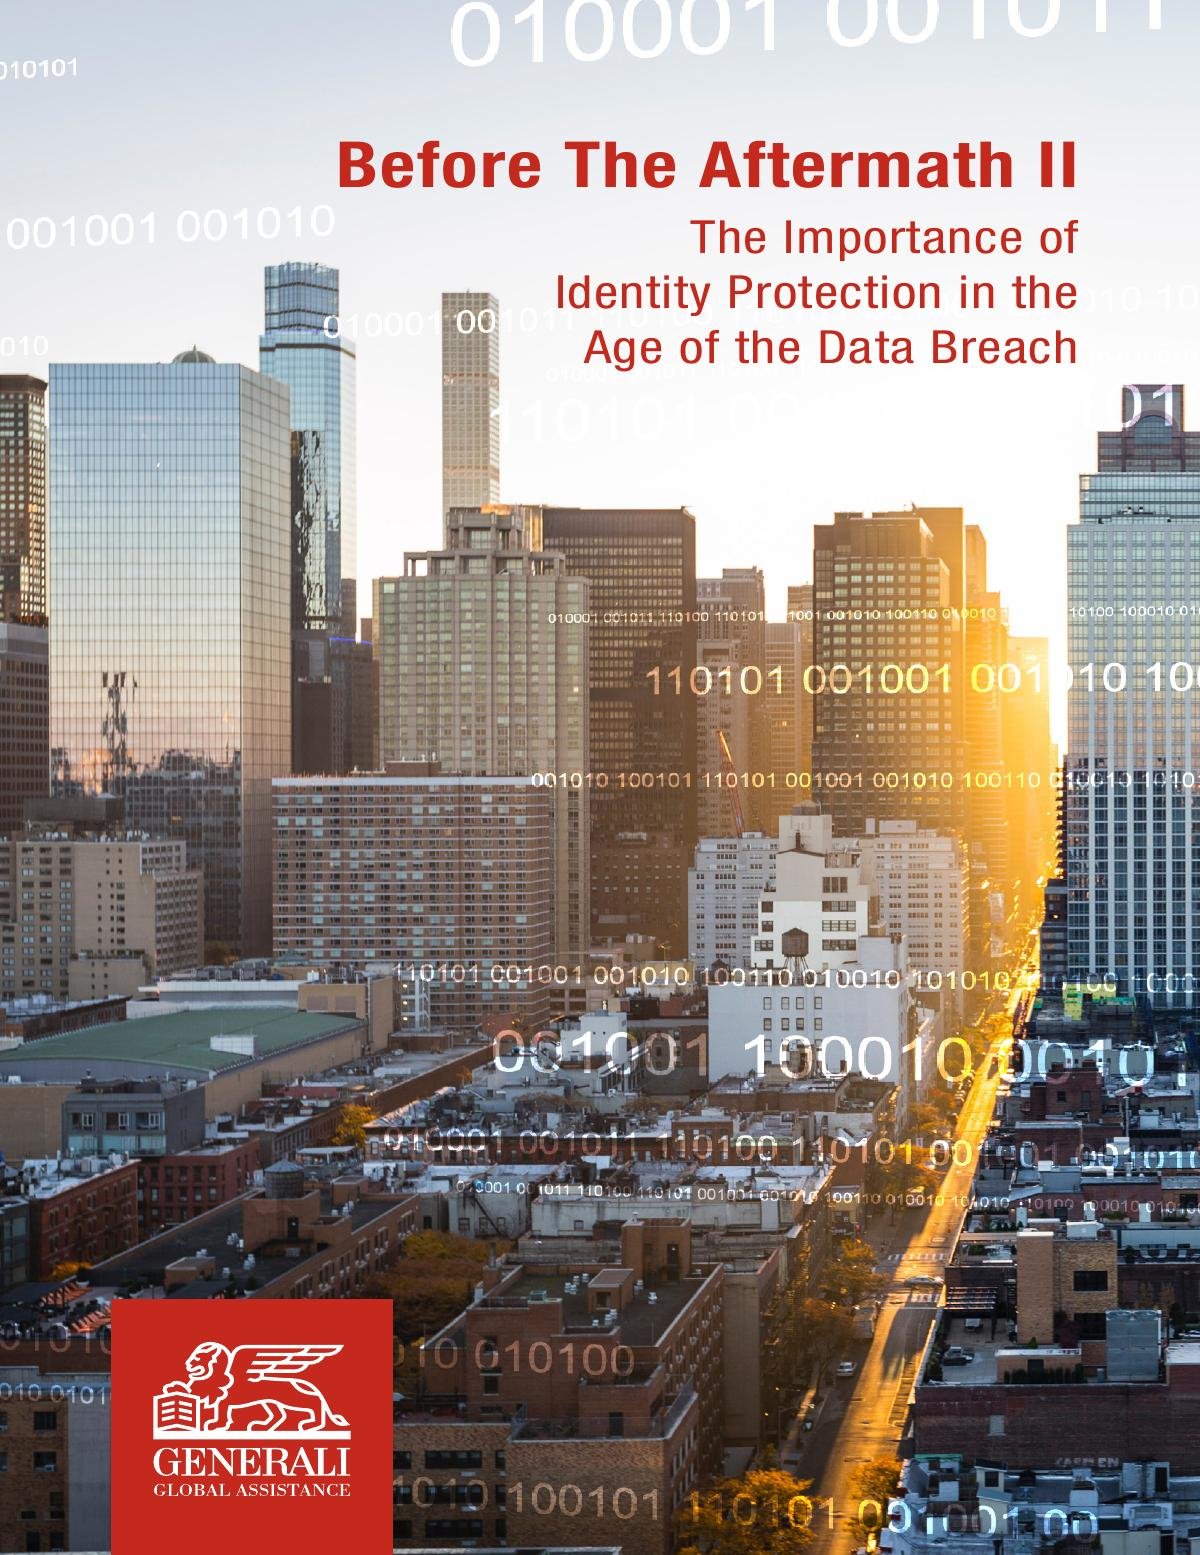 Before the Aftermath II: The Importance of Identity Protection in the Age of the Data Breach